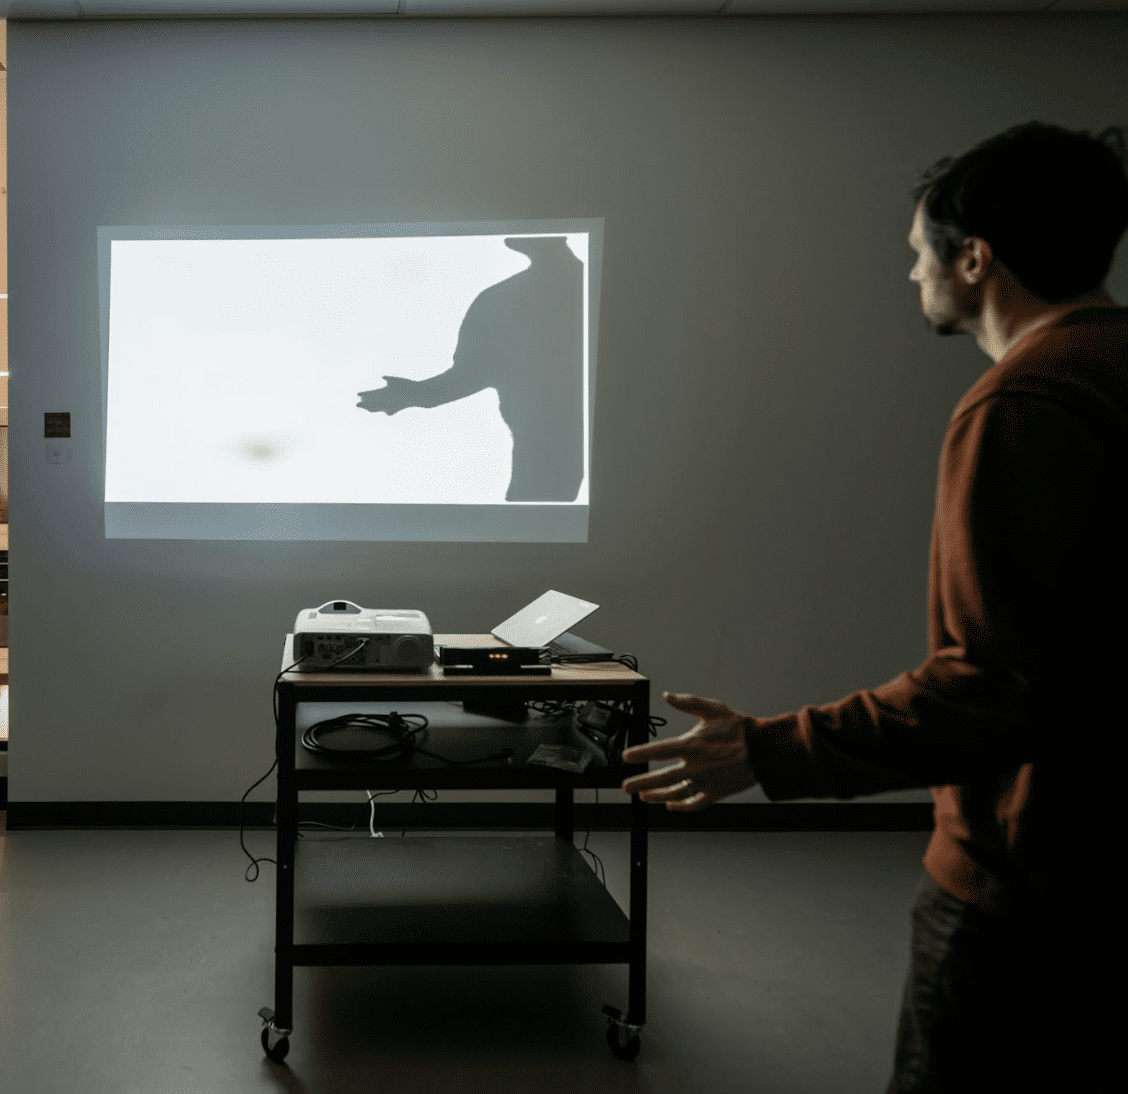 A small projection is displayed on a wall. The video shows a silhouette of a person, mirroring a person standing in the room.